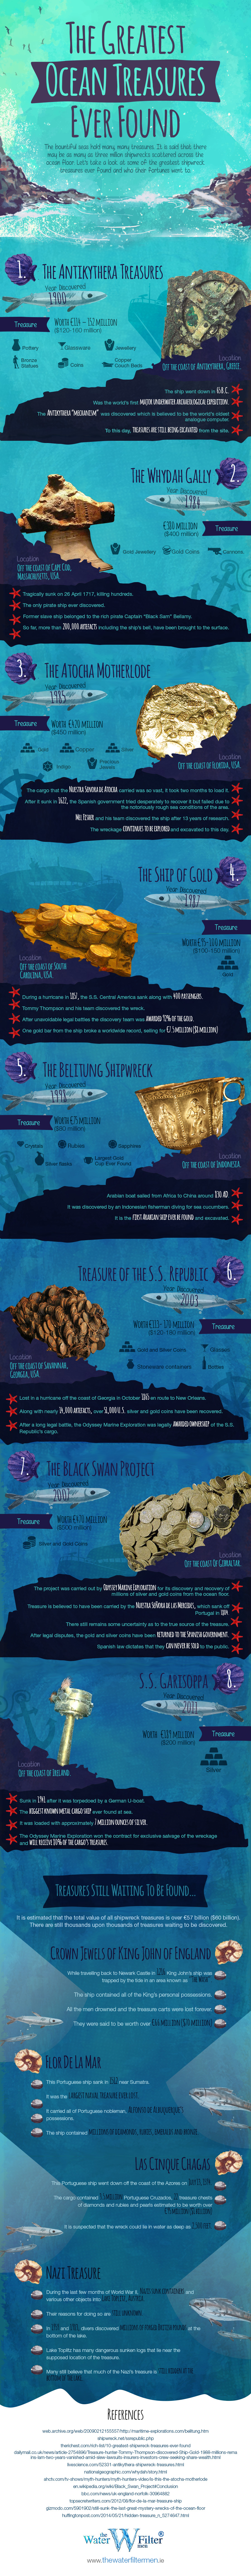 The-Greatest-Ocean-Treasures-Ever-Found-Infographic.jpg